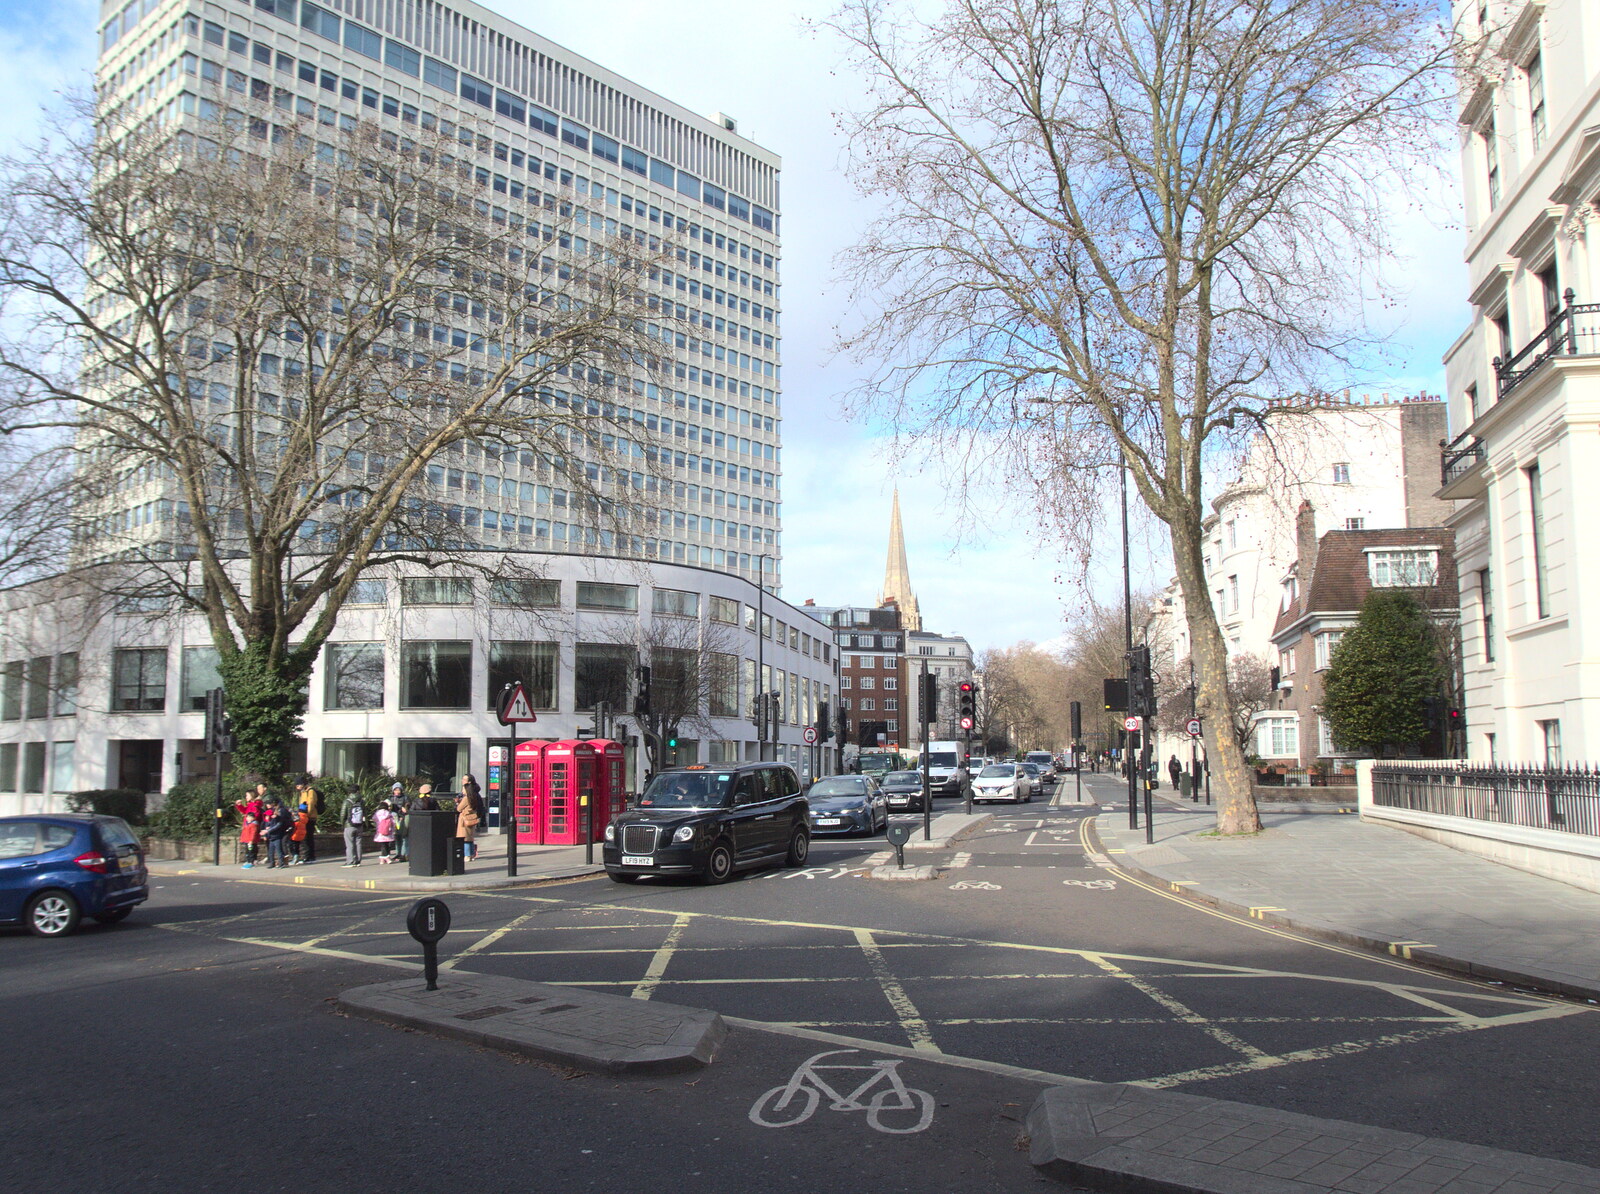 The Royal Lancaster and Westbourne Street from The Last Trip to the SwiftKey Office, Paddington, London - 23rd February 2022